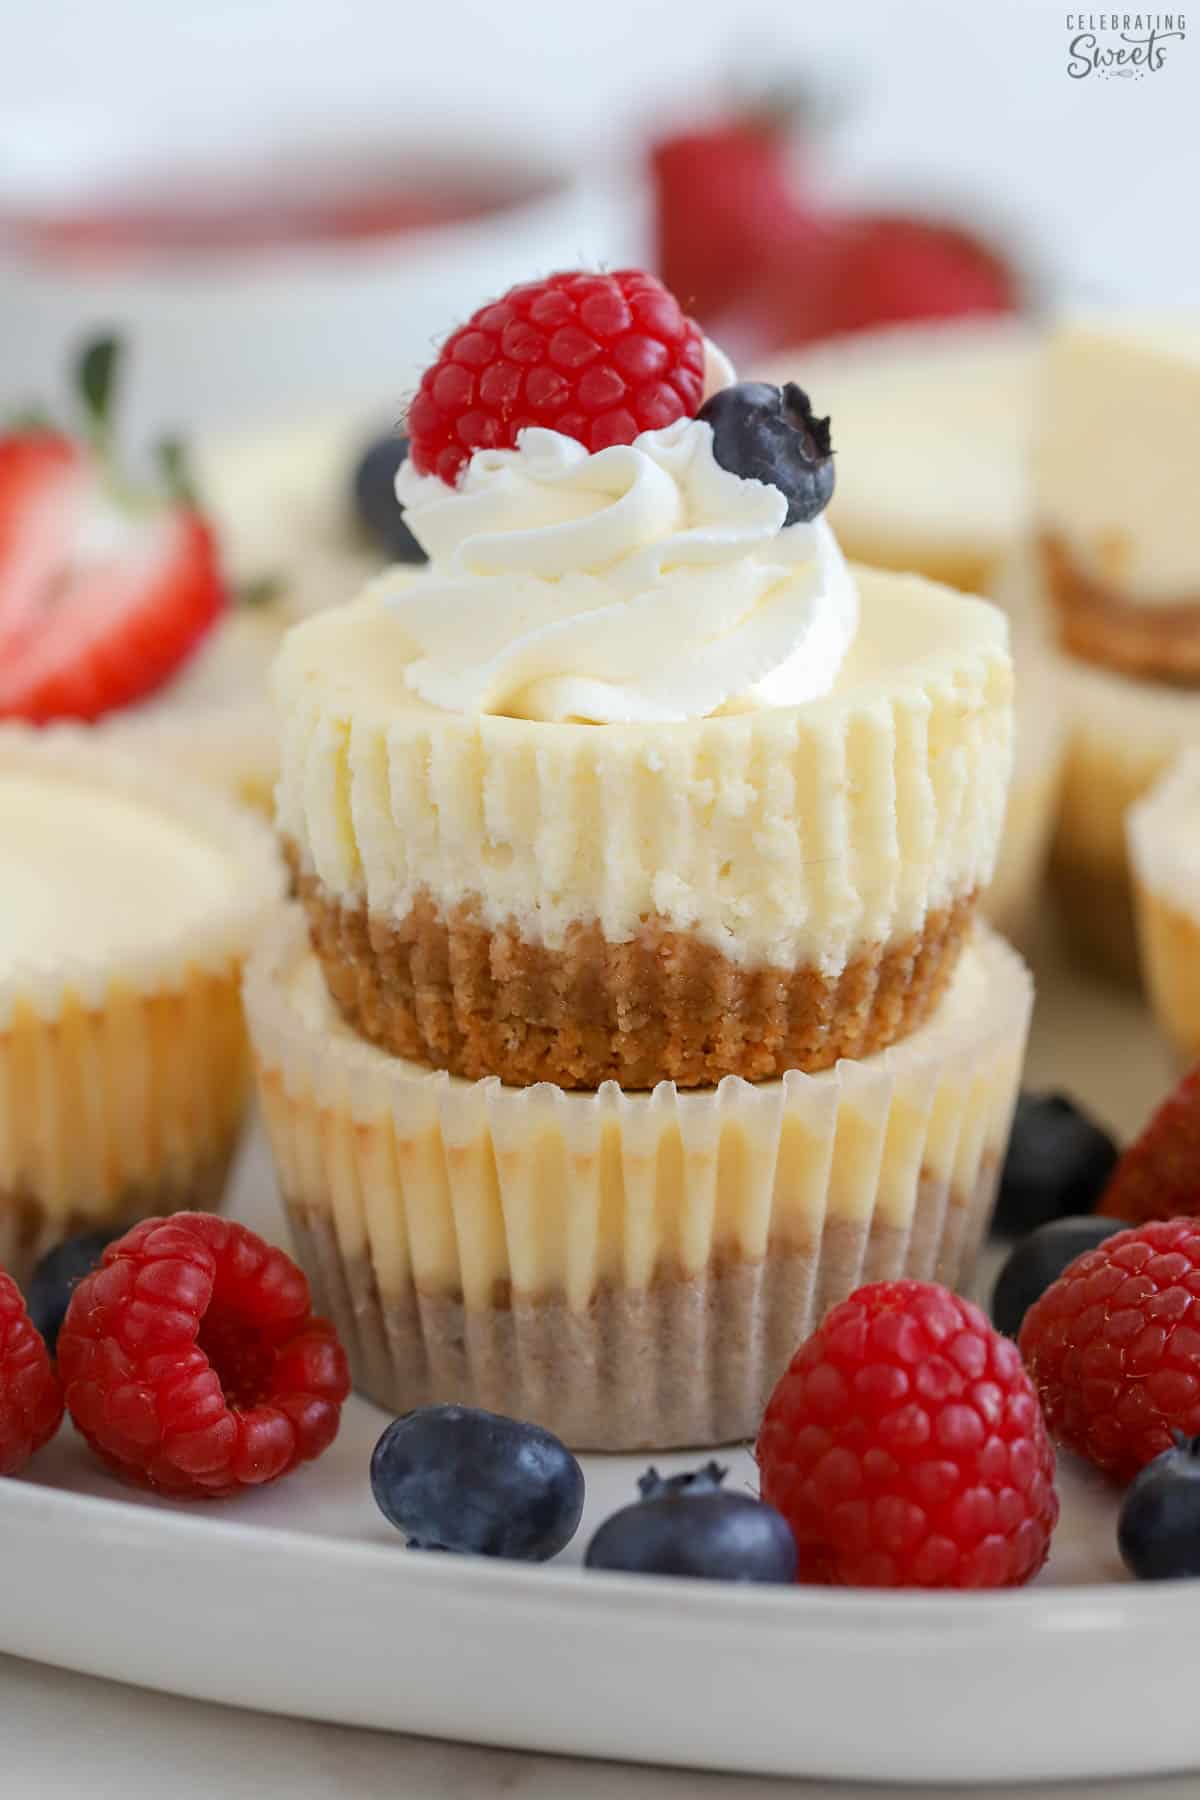 Two mini cheesecakes stacked on top of each other with whipped cream and berries.